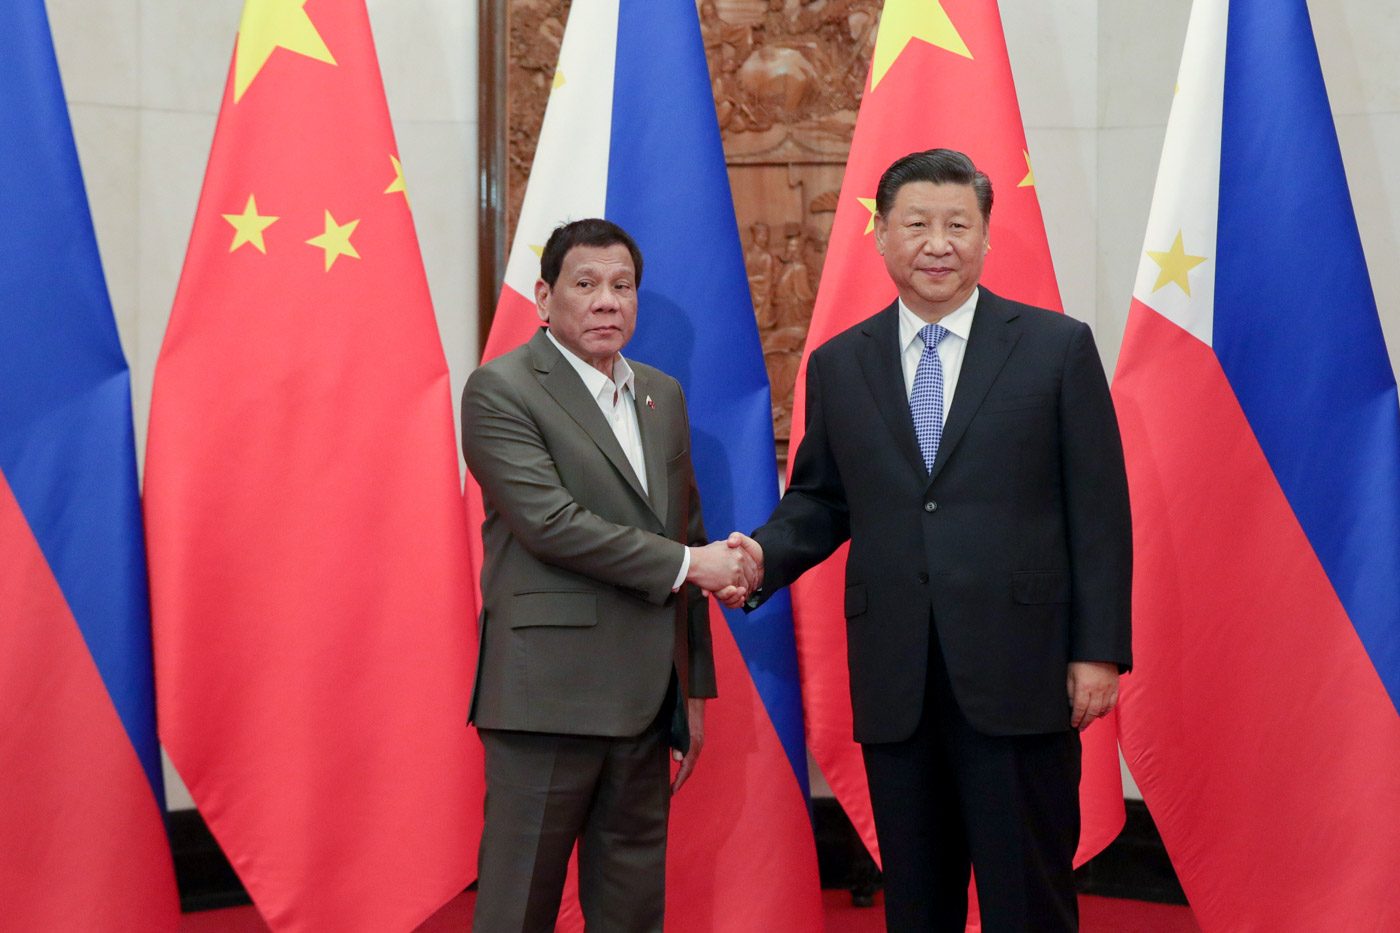 In Xi meeting, Duterte sees ‘stronger momentum’ in PH-China ties